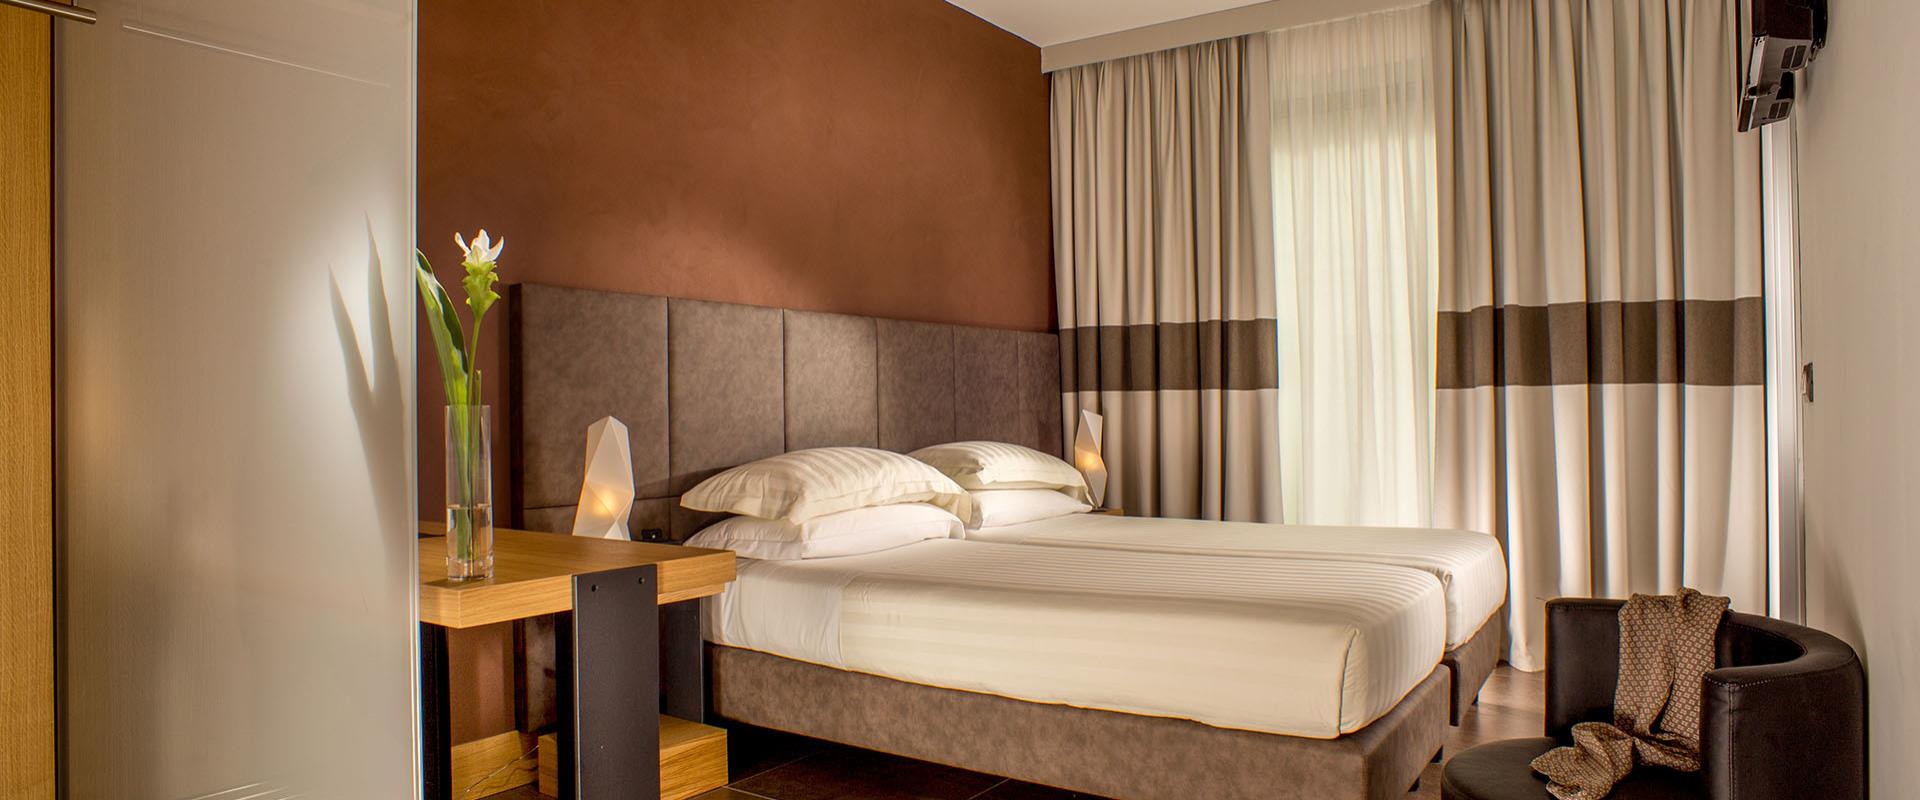 Camere al Best Western Plus Hotel Spring House 4 stelle a Roma